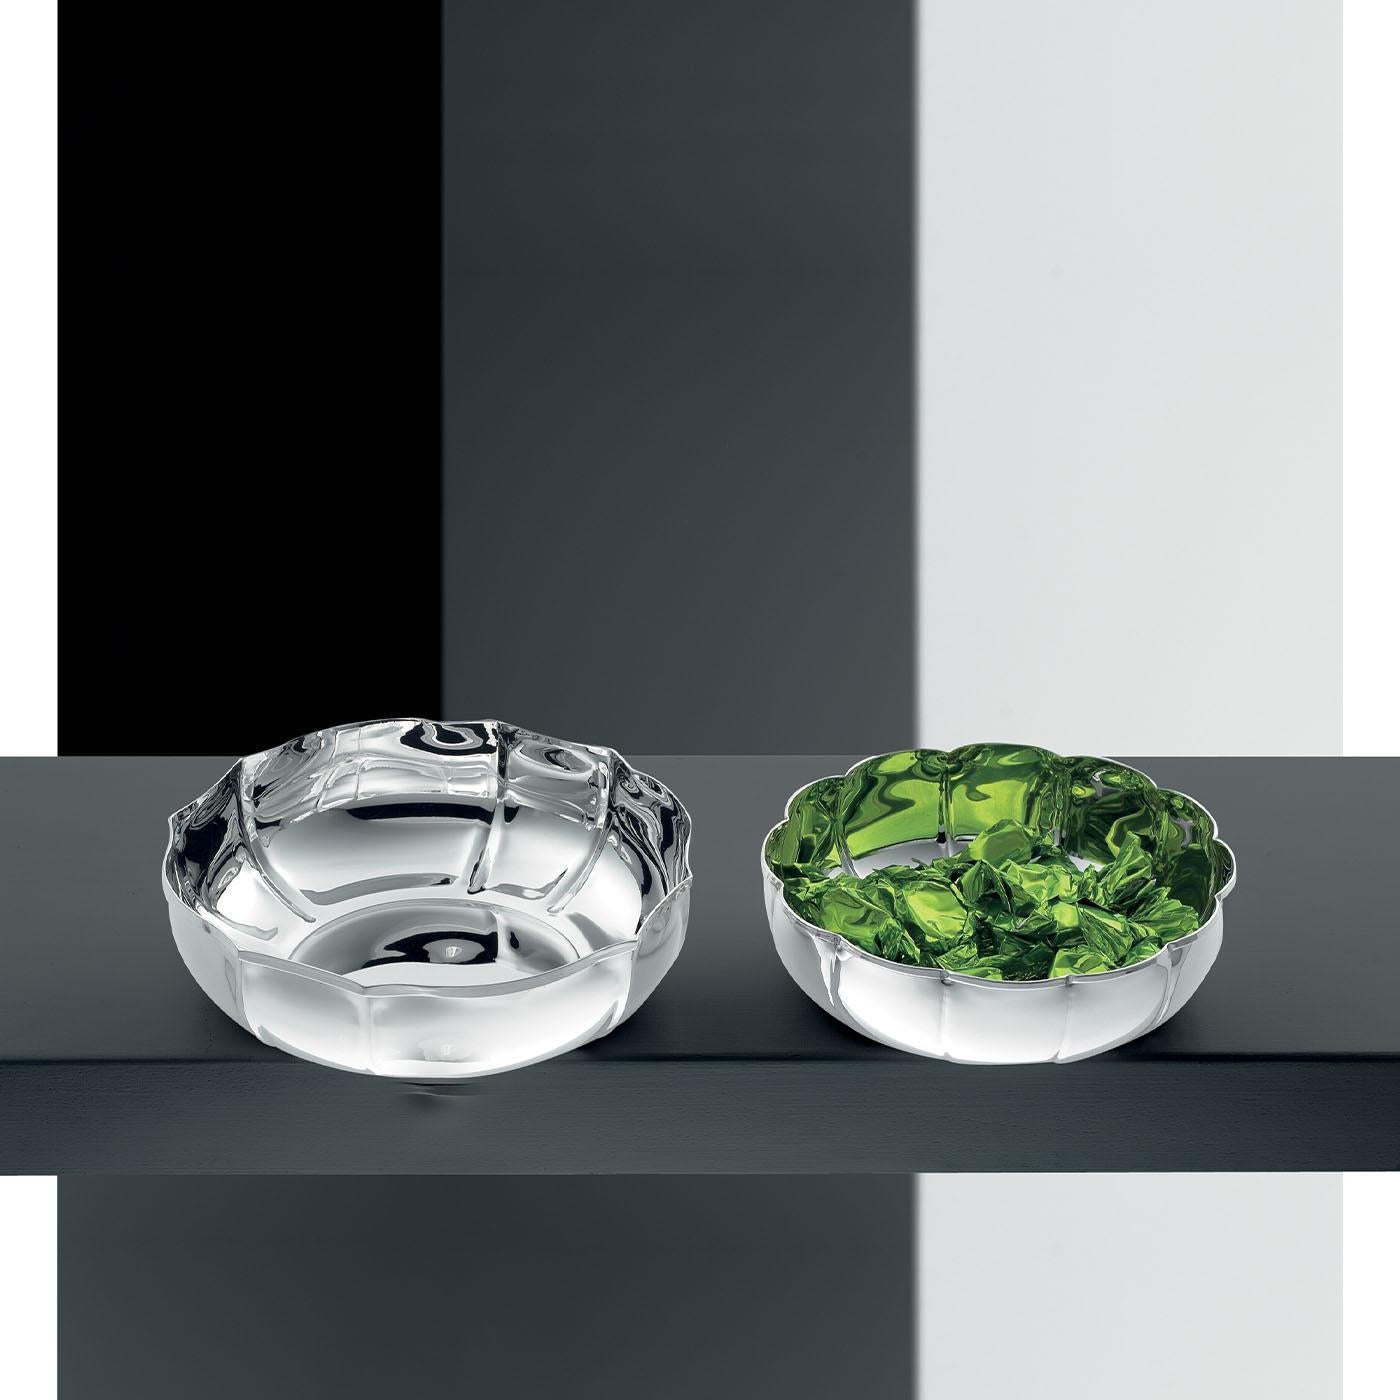 This splendid centerpiece bowl is a refined design whose silhouette is distinguished by inner grooves that result in slight protuberances for a truly precious textural quality. The luminosity owed to the gleaming silver plating is emphasized in its